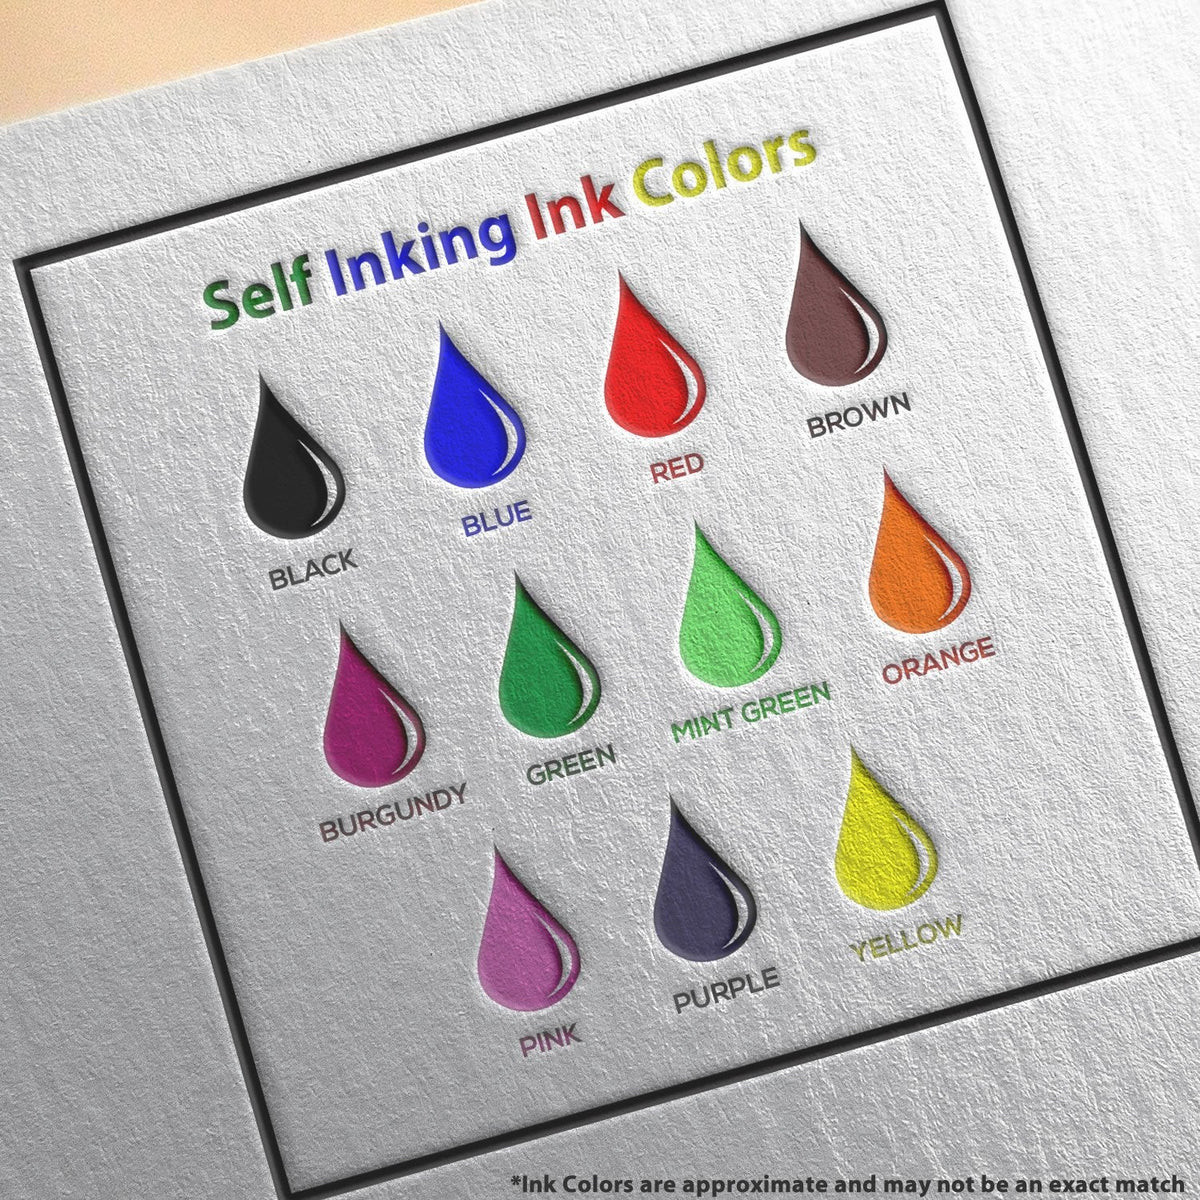 Self-Inking Scanned with Line Stamp Ink Color Options